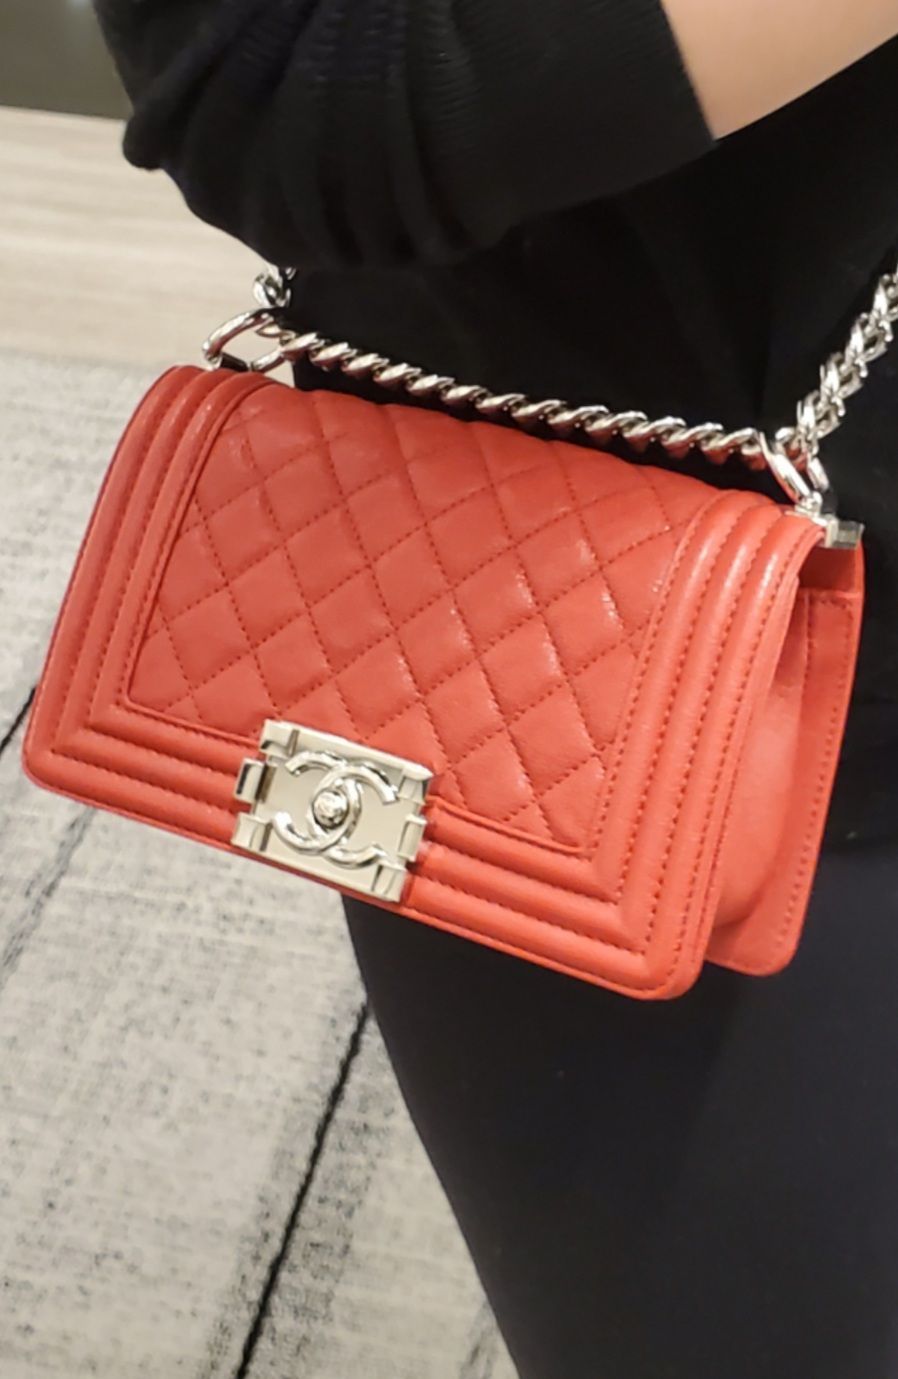 Will you buy a Chanel bag that has been sitting in the store for 1 year?